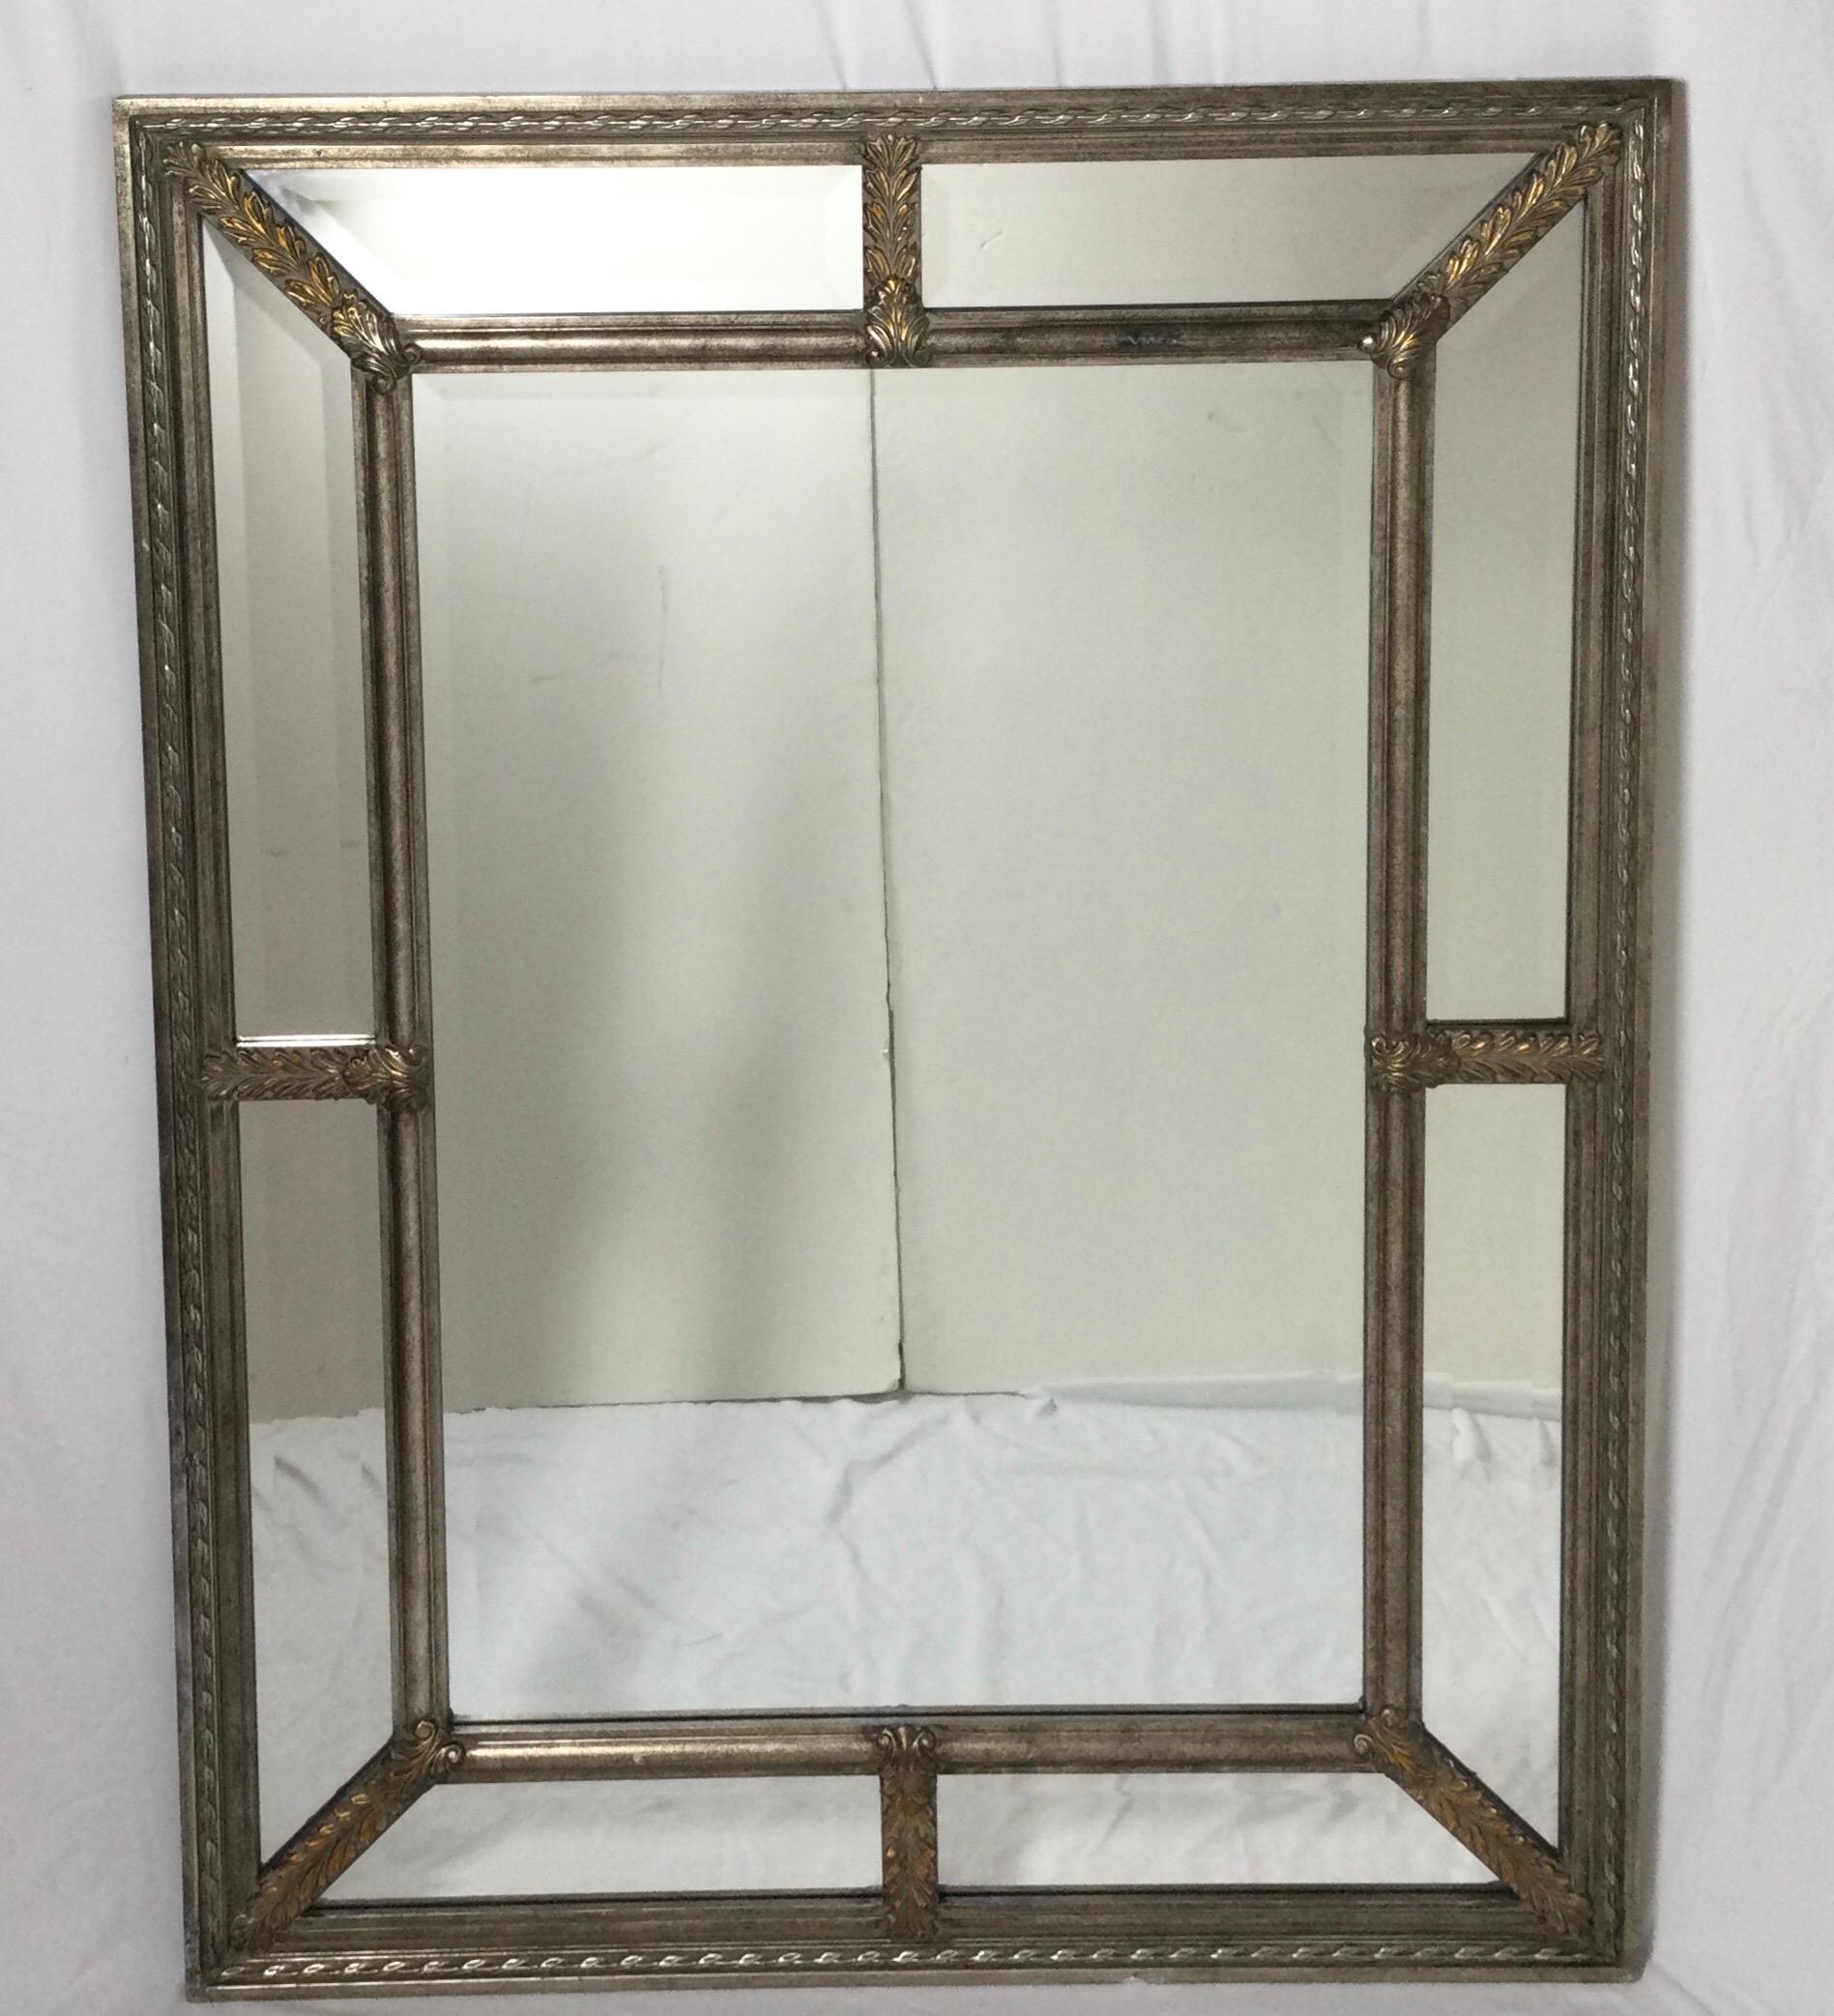 20th century Silver Gilt Venetian style beveled mirror with gilt gold accents. Every separate mirror is beveled which gives such great light. Great design and hard to find silver color.
Dimensions; 49